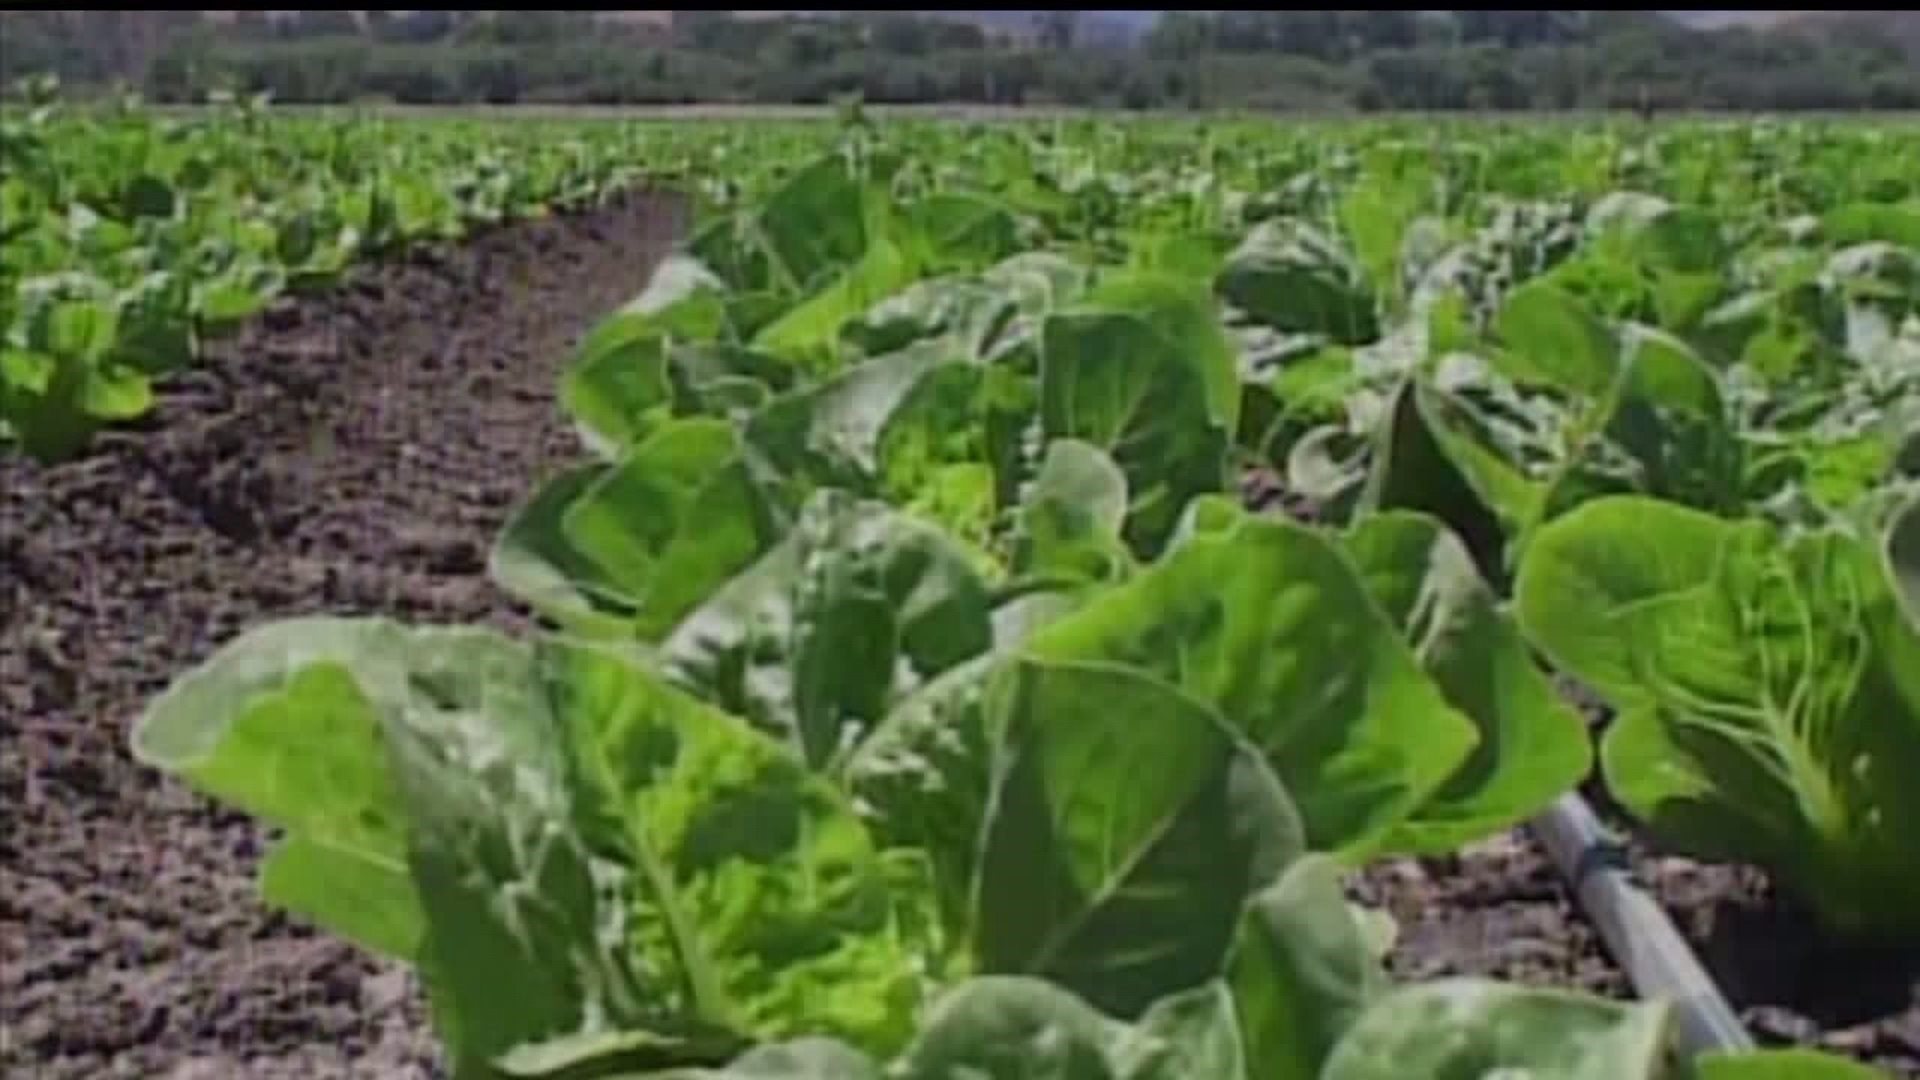 PA`s Department of Health is urging residents to get rid of any romaine lettuce that may be from Yuma, Arizona